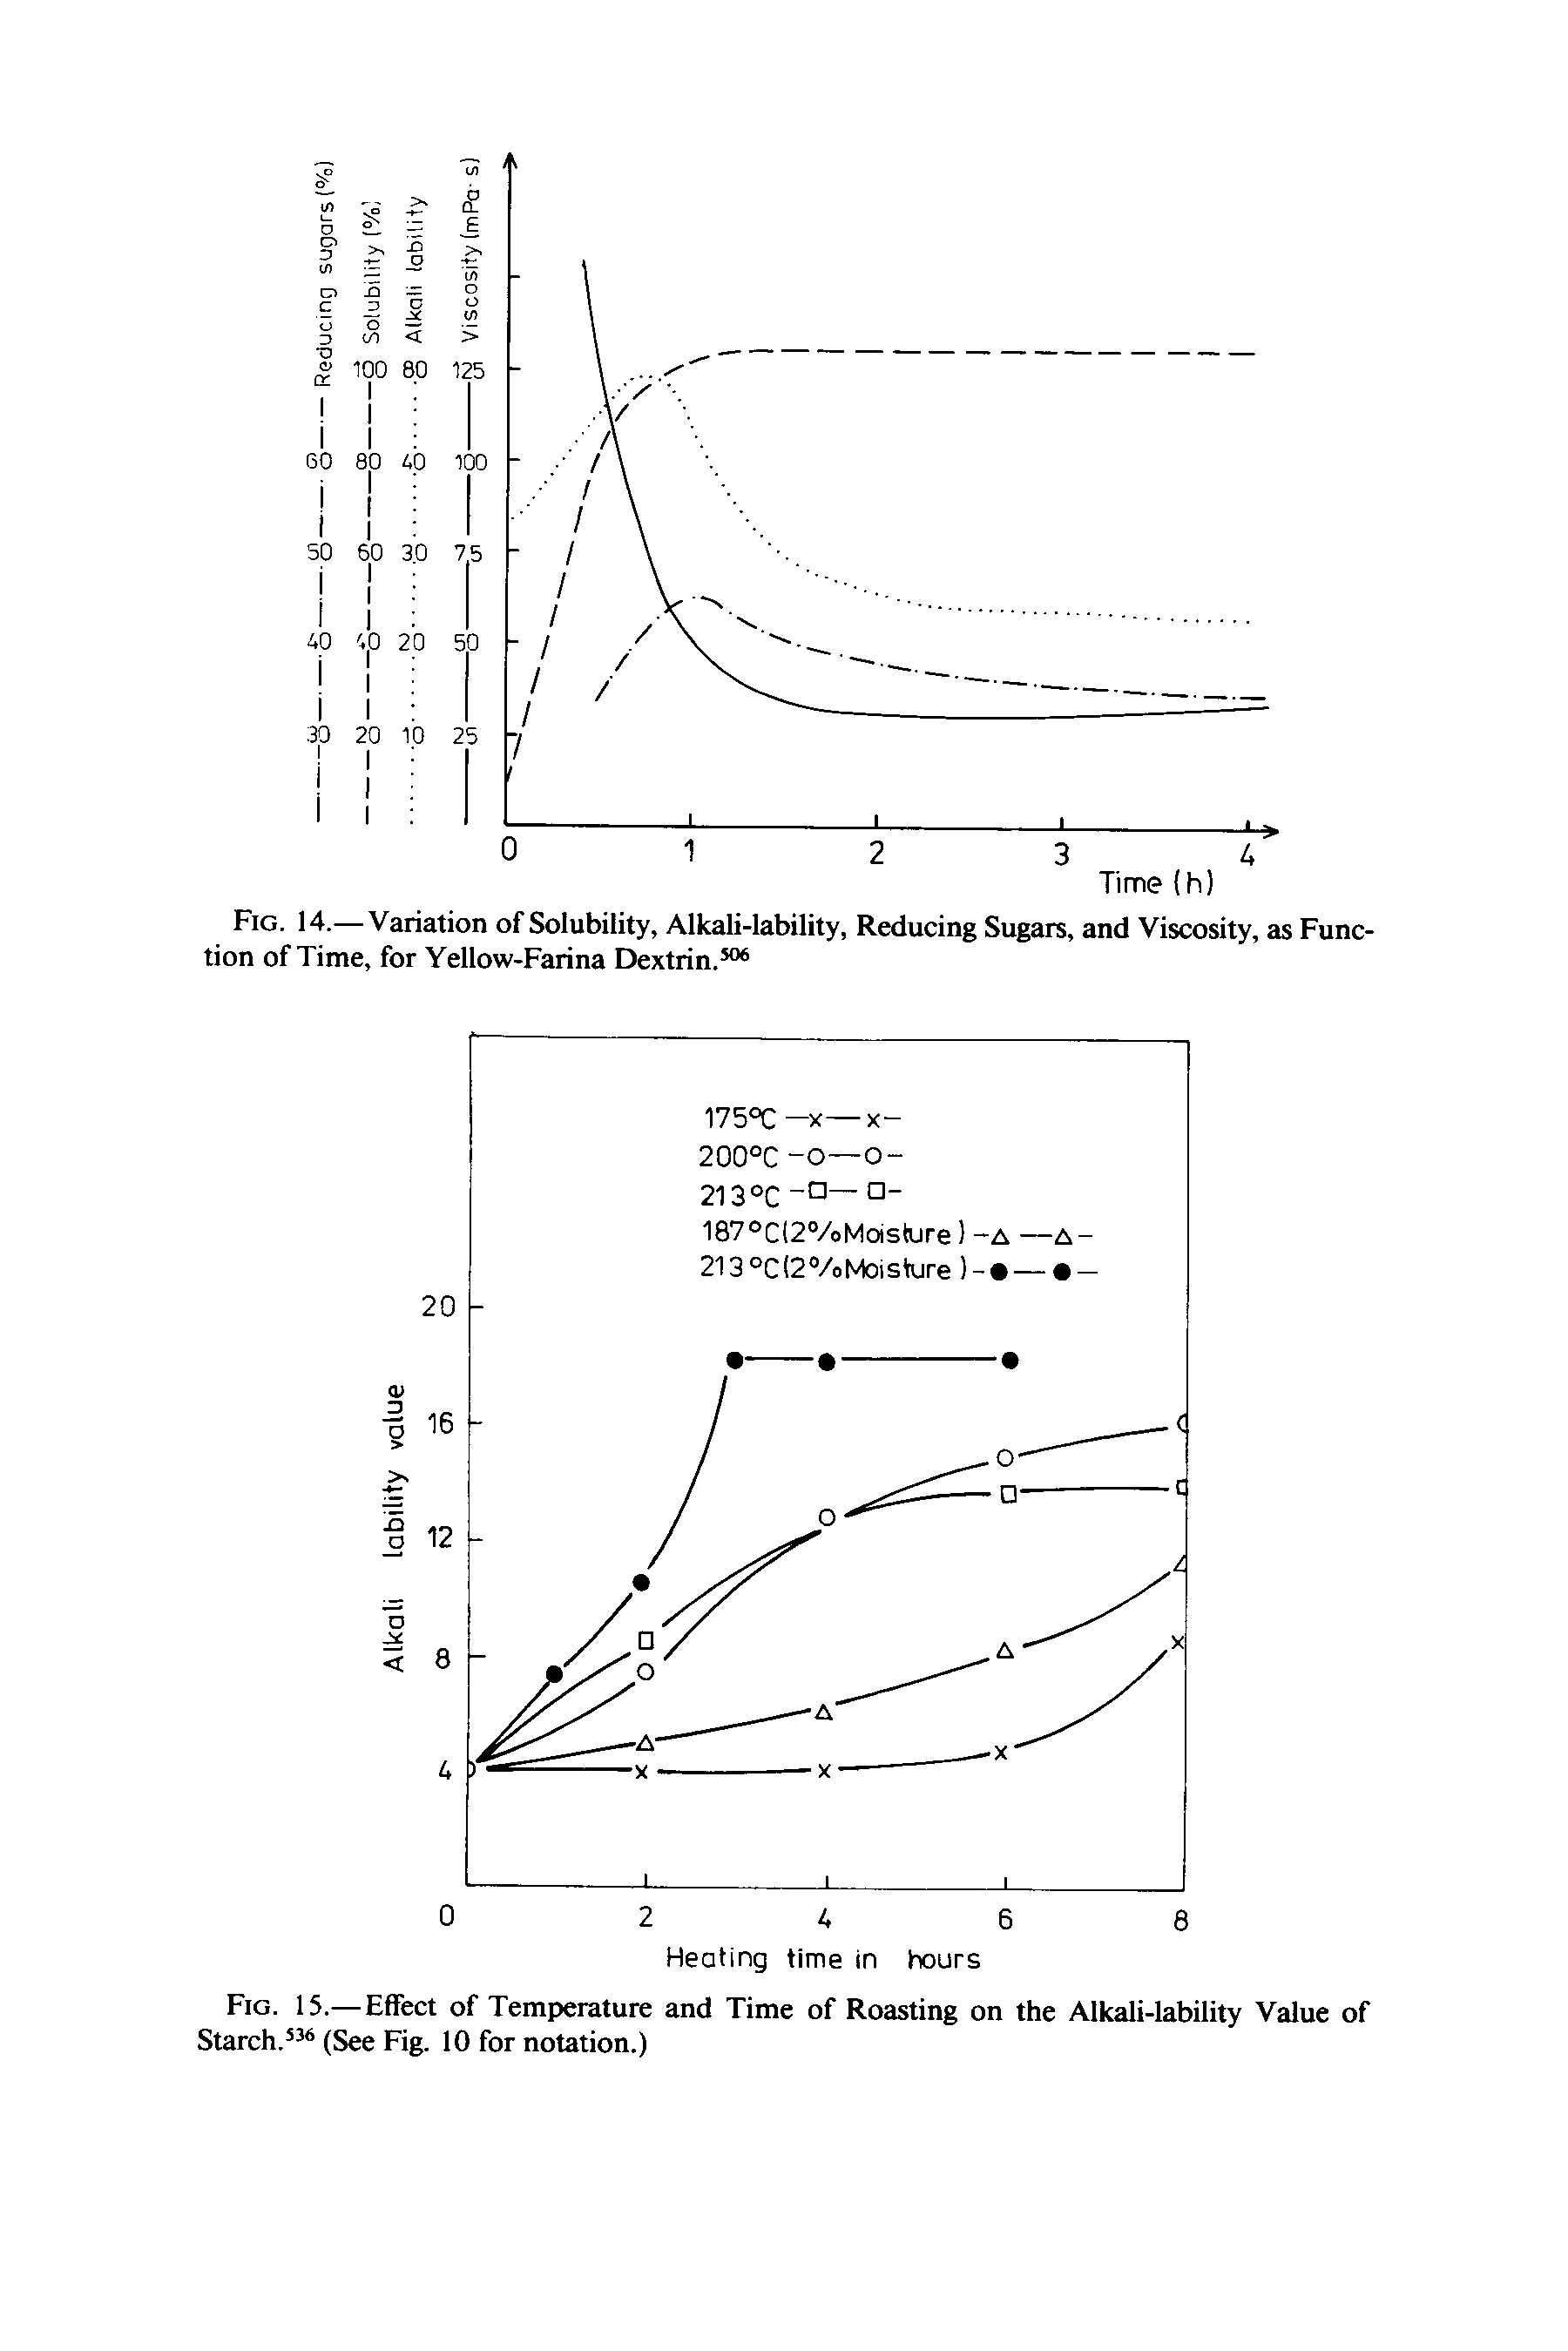 Fig. 15.— Effect of Temperature and Time of Roasting on the Alkali-lability Value of Starch. (See Fig. 10 for notation.)...